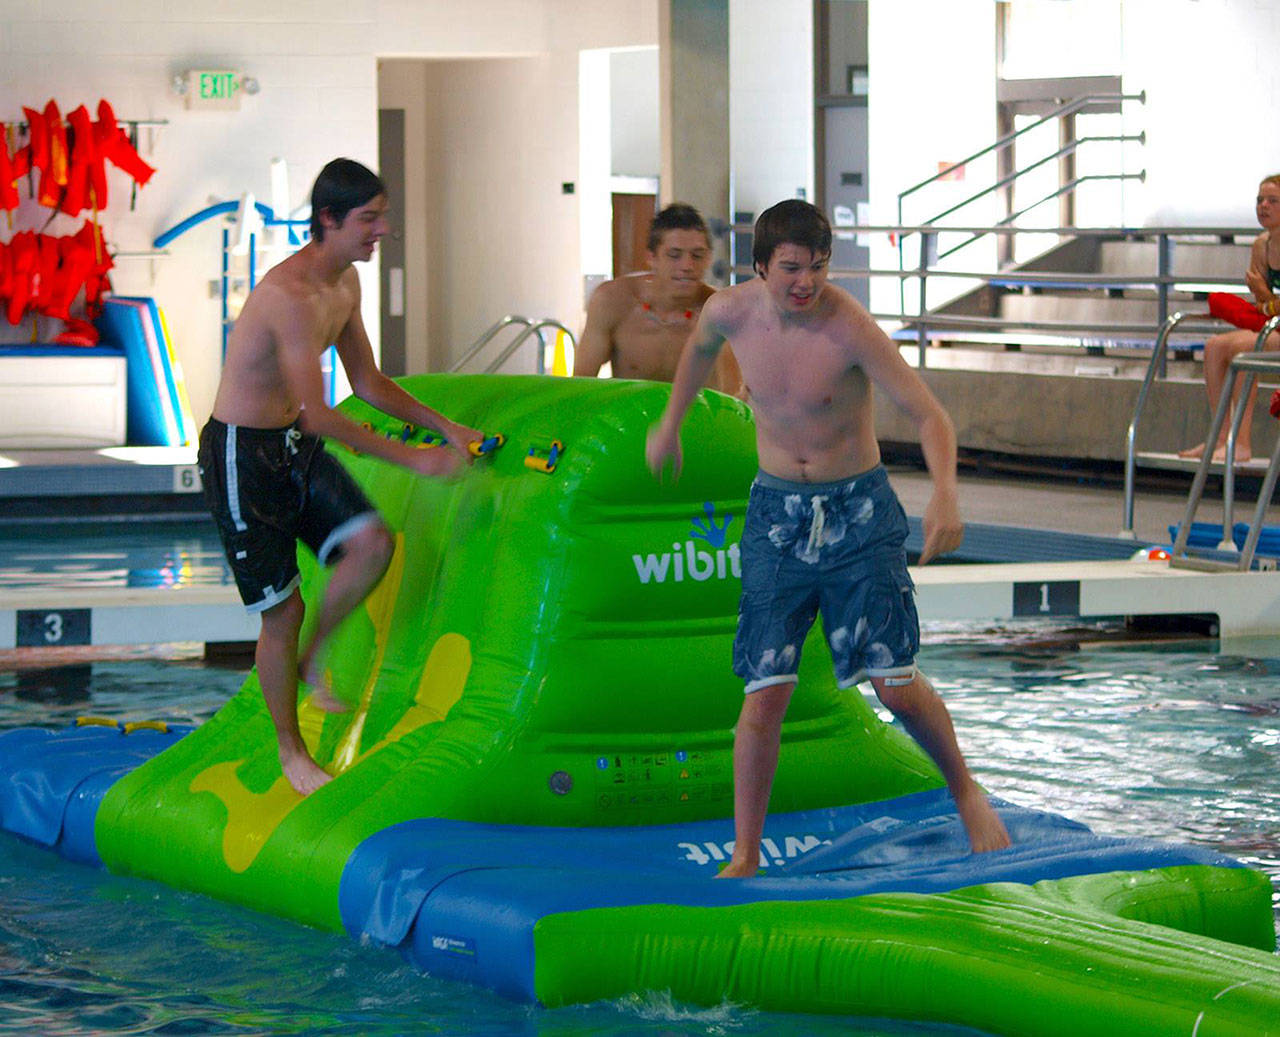 Teenagers at the Enumclaw pool enjoying WIBIT Night in February; WIBIT is a company that makes unique water inflatables, like obstacle courses, climbing walls, battle arenas, and more. Photo courtesy Enumclaw Aquatic Center